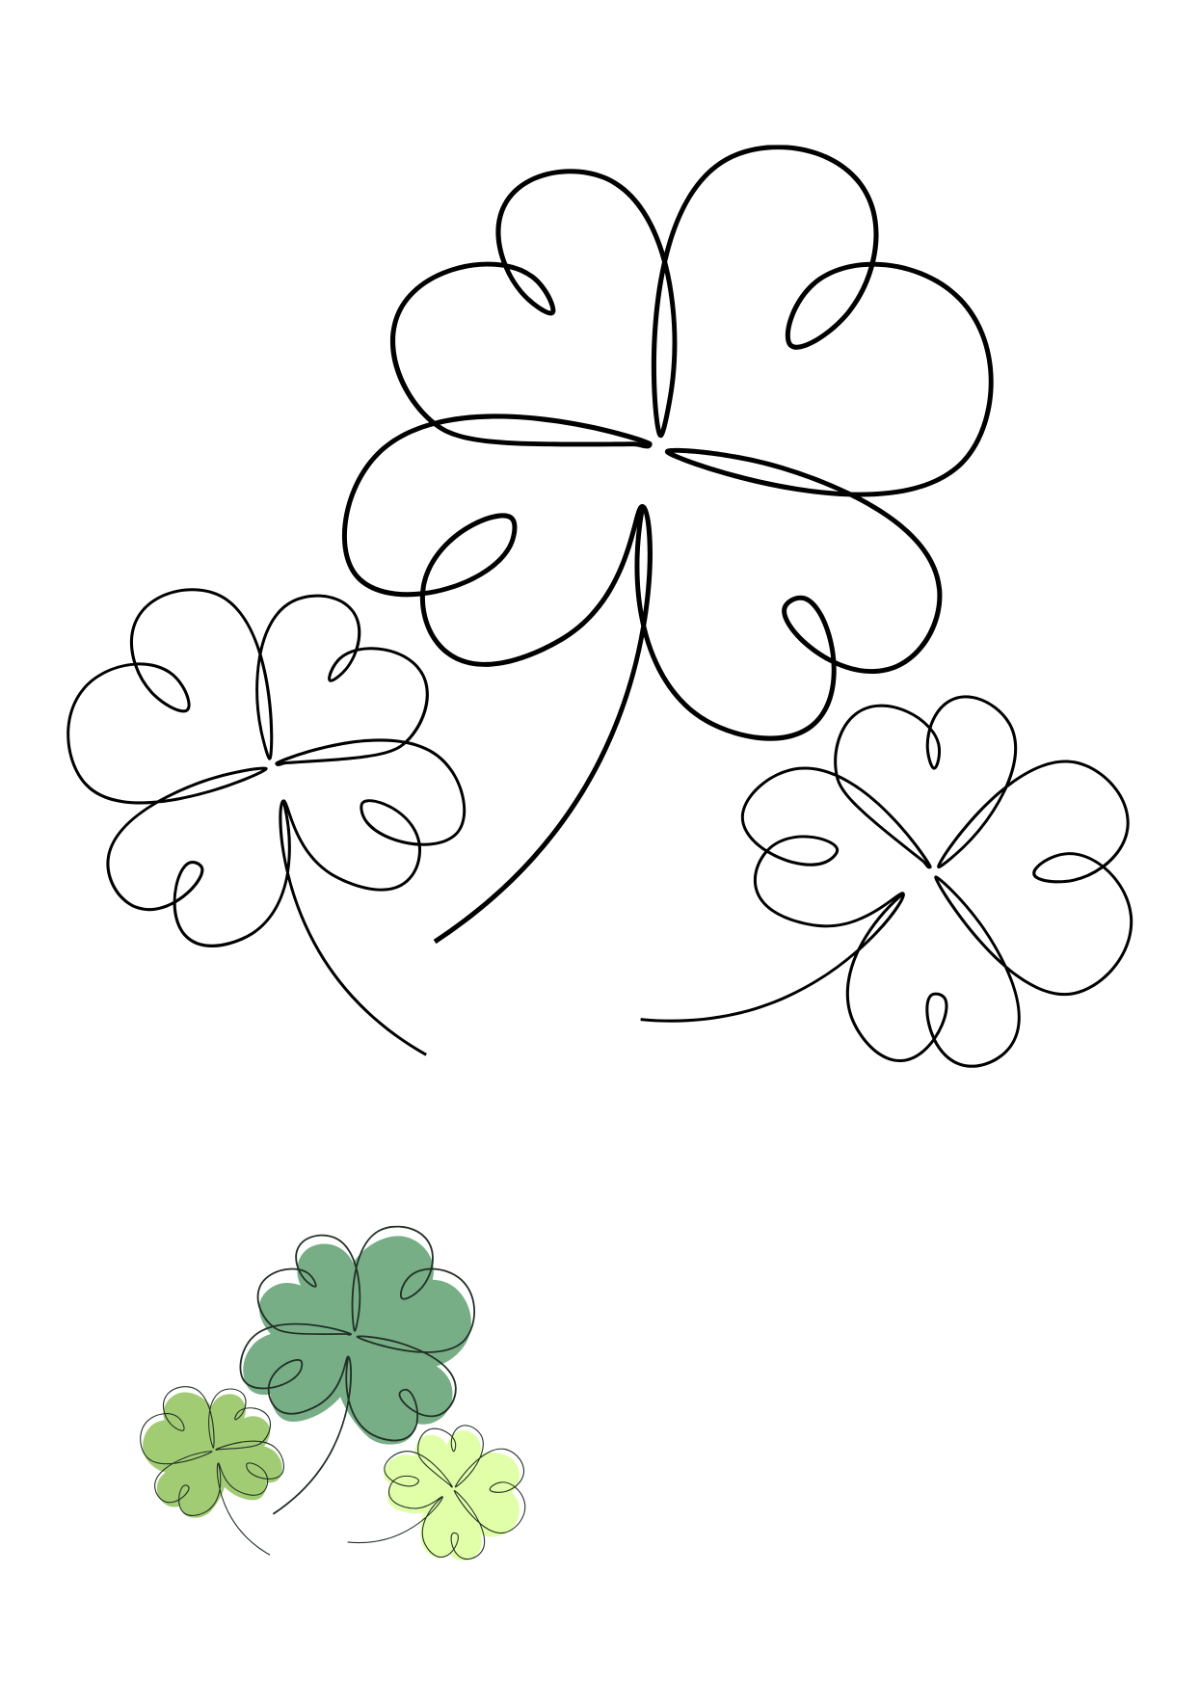 Shamrock Coloring Page for Kids Template